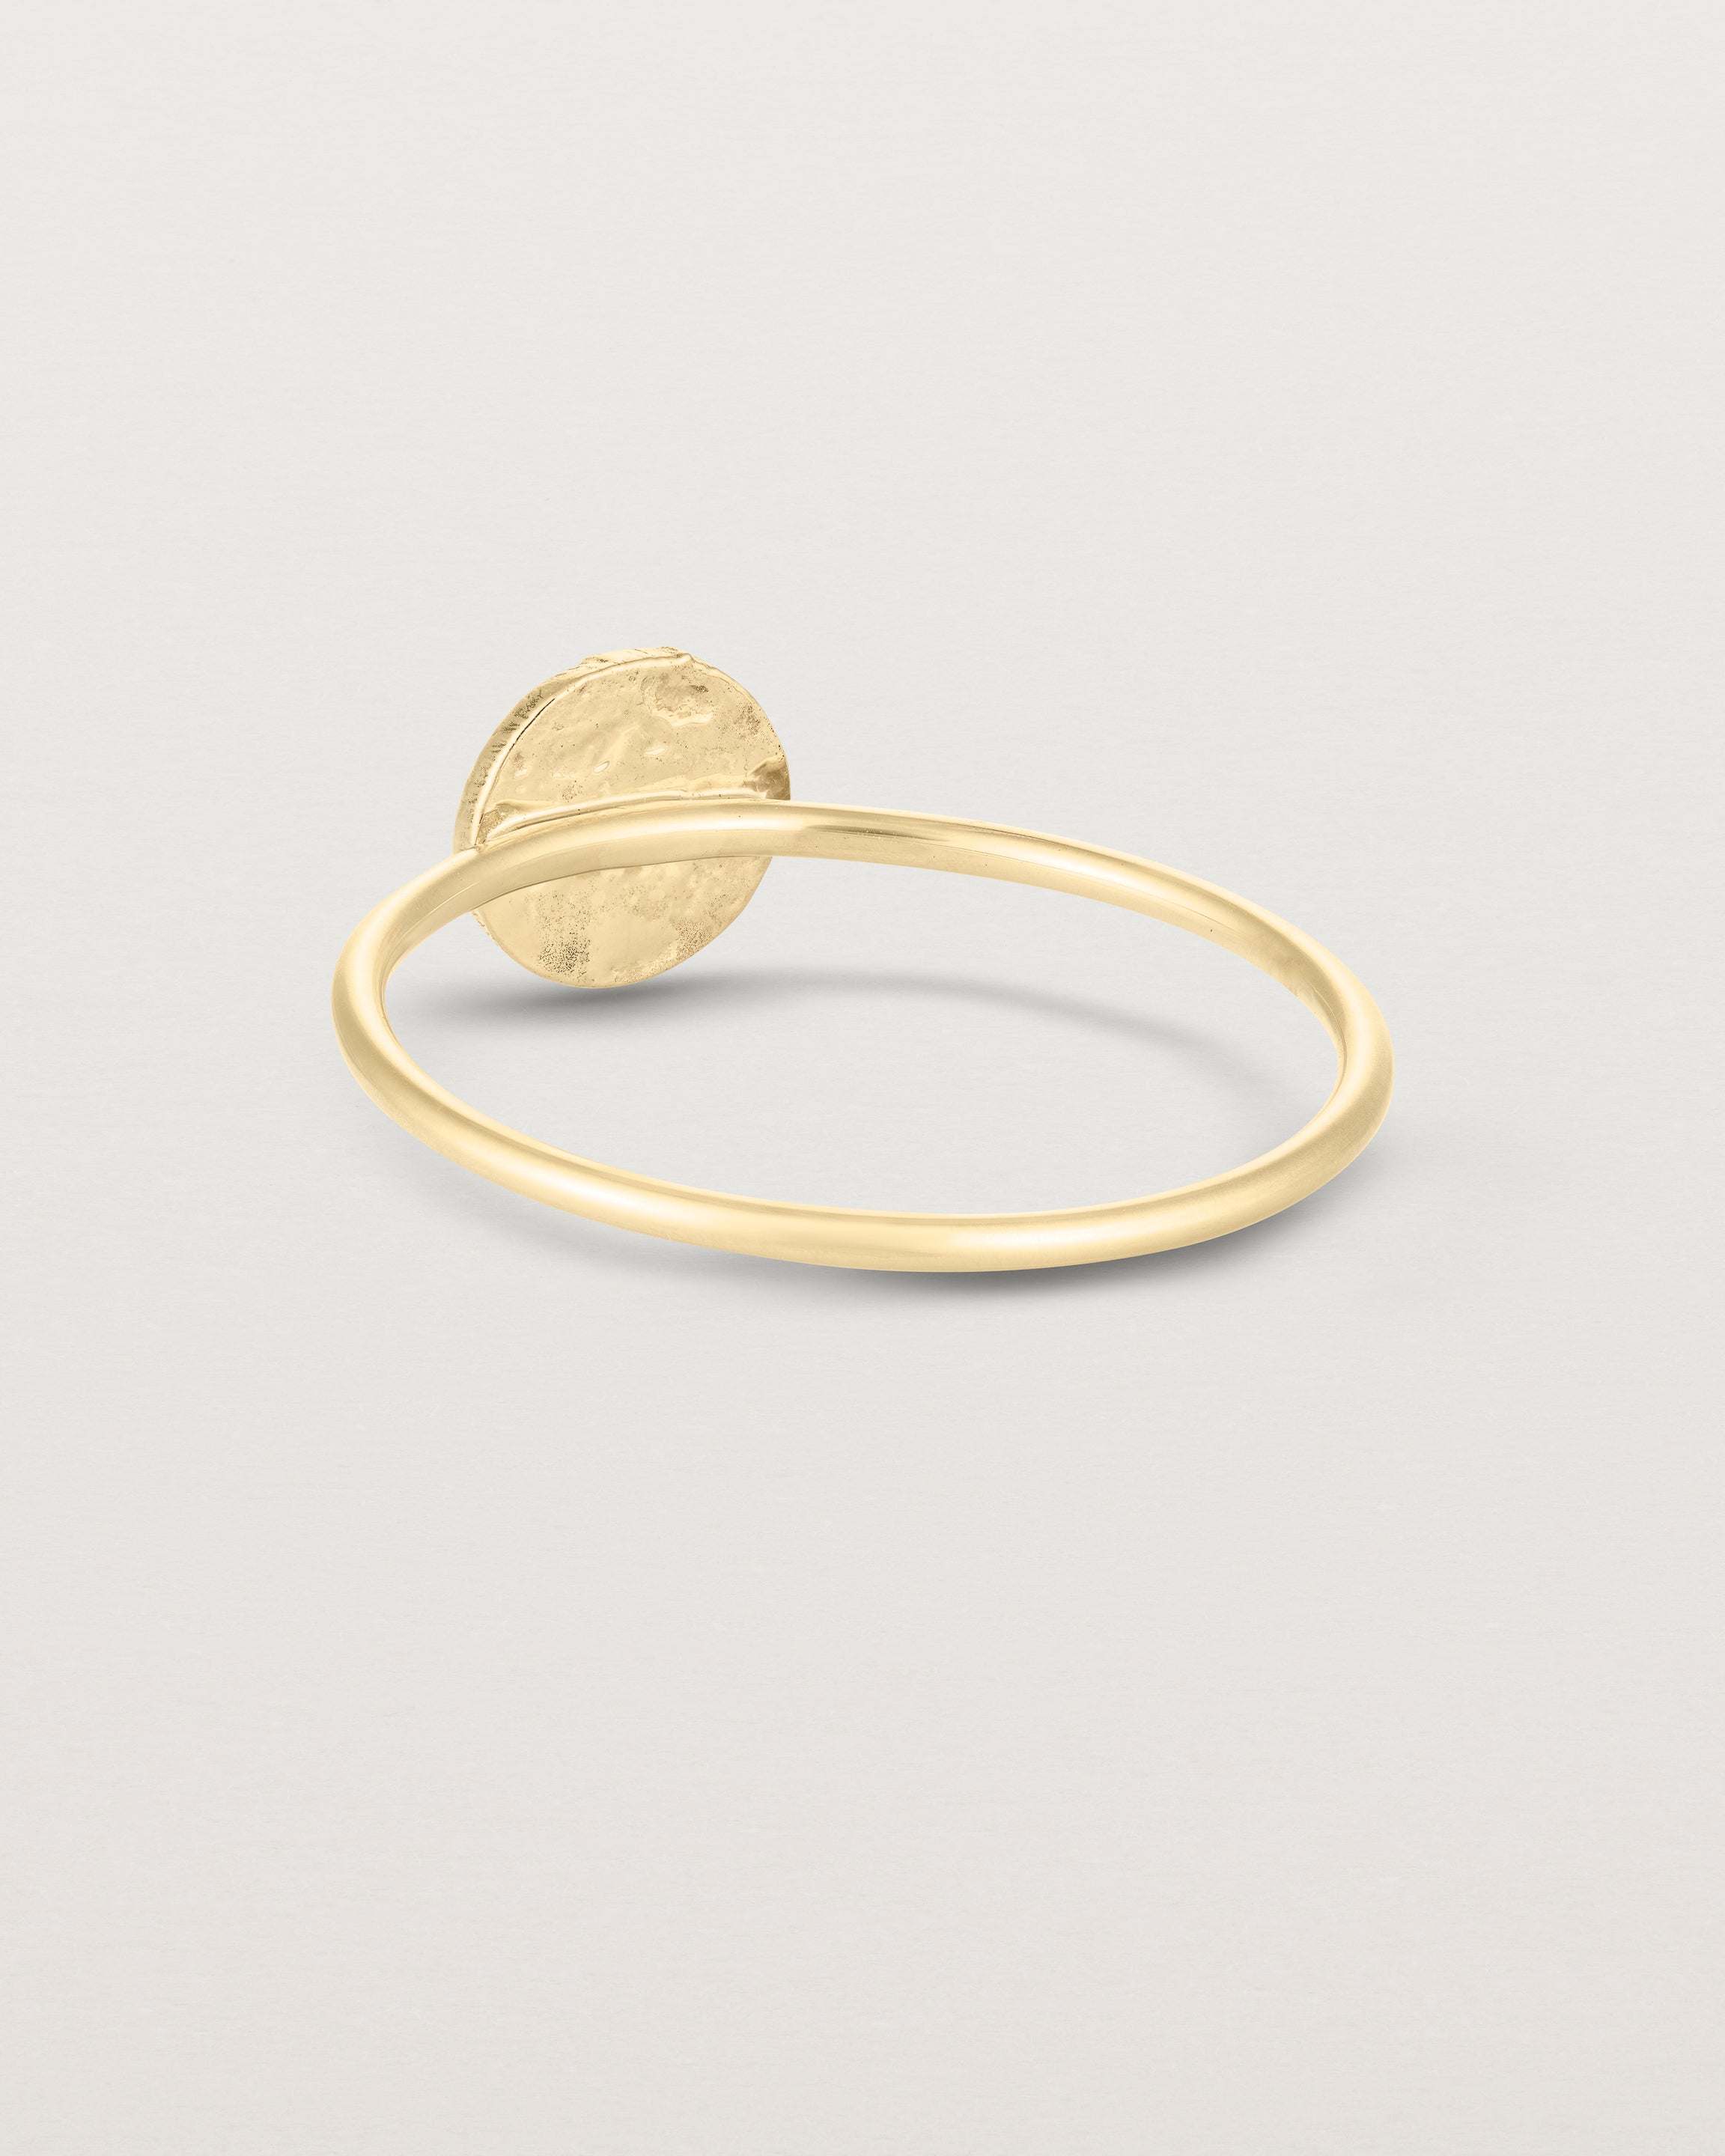 Back view of the Moon Ring in yellow gold.